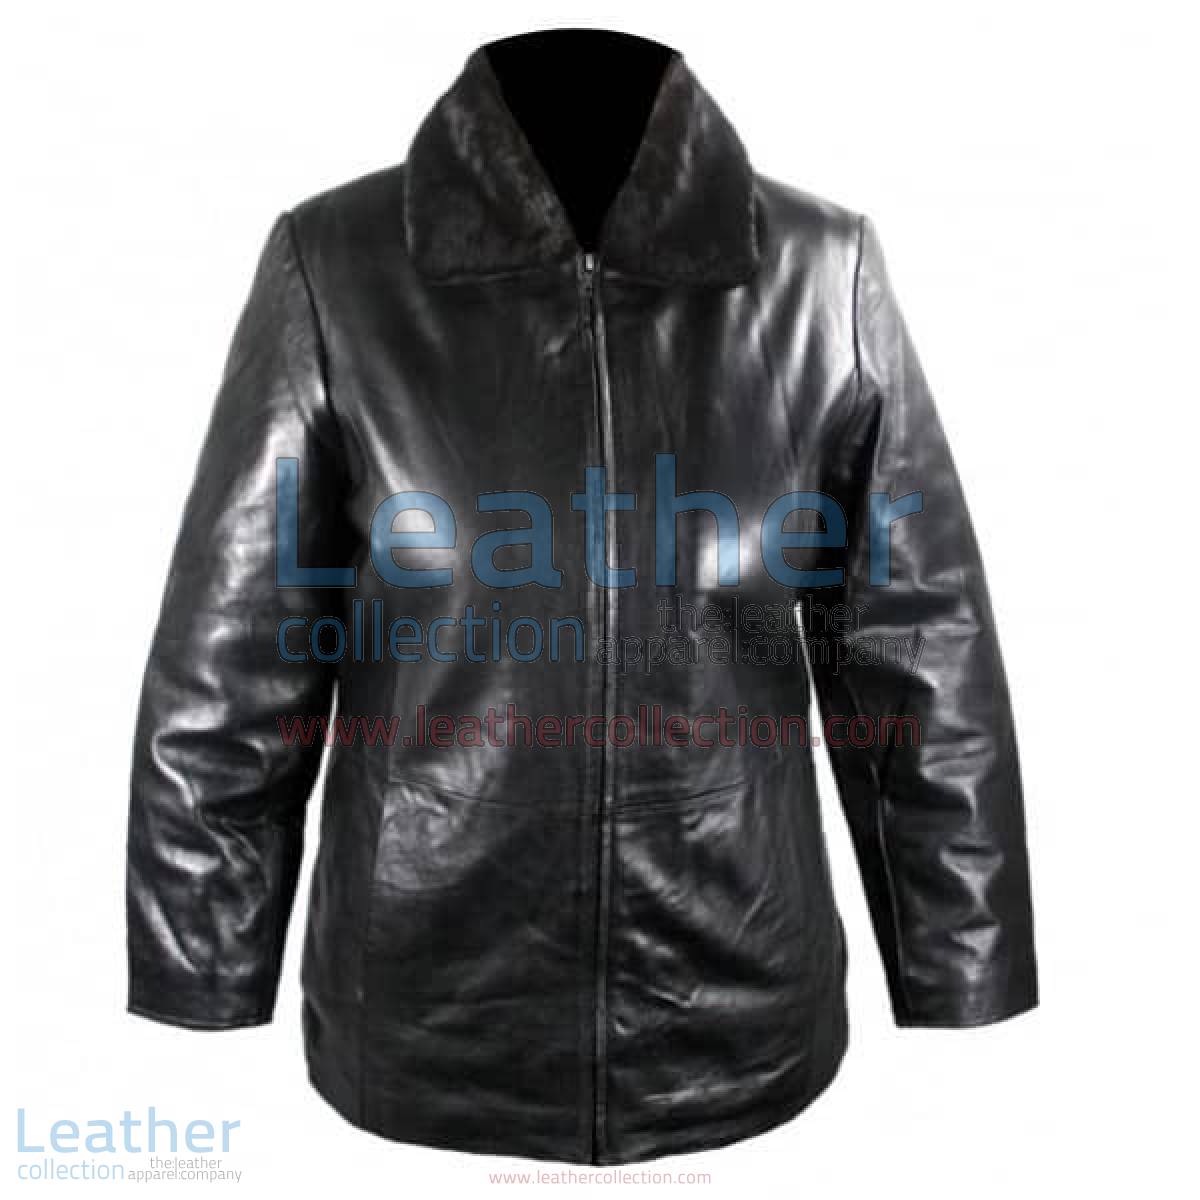 Leather Jacket With Fur Collar | leather jacket with fur collar